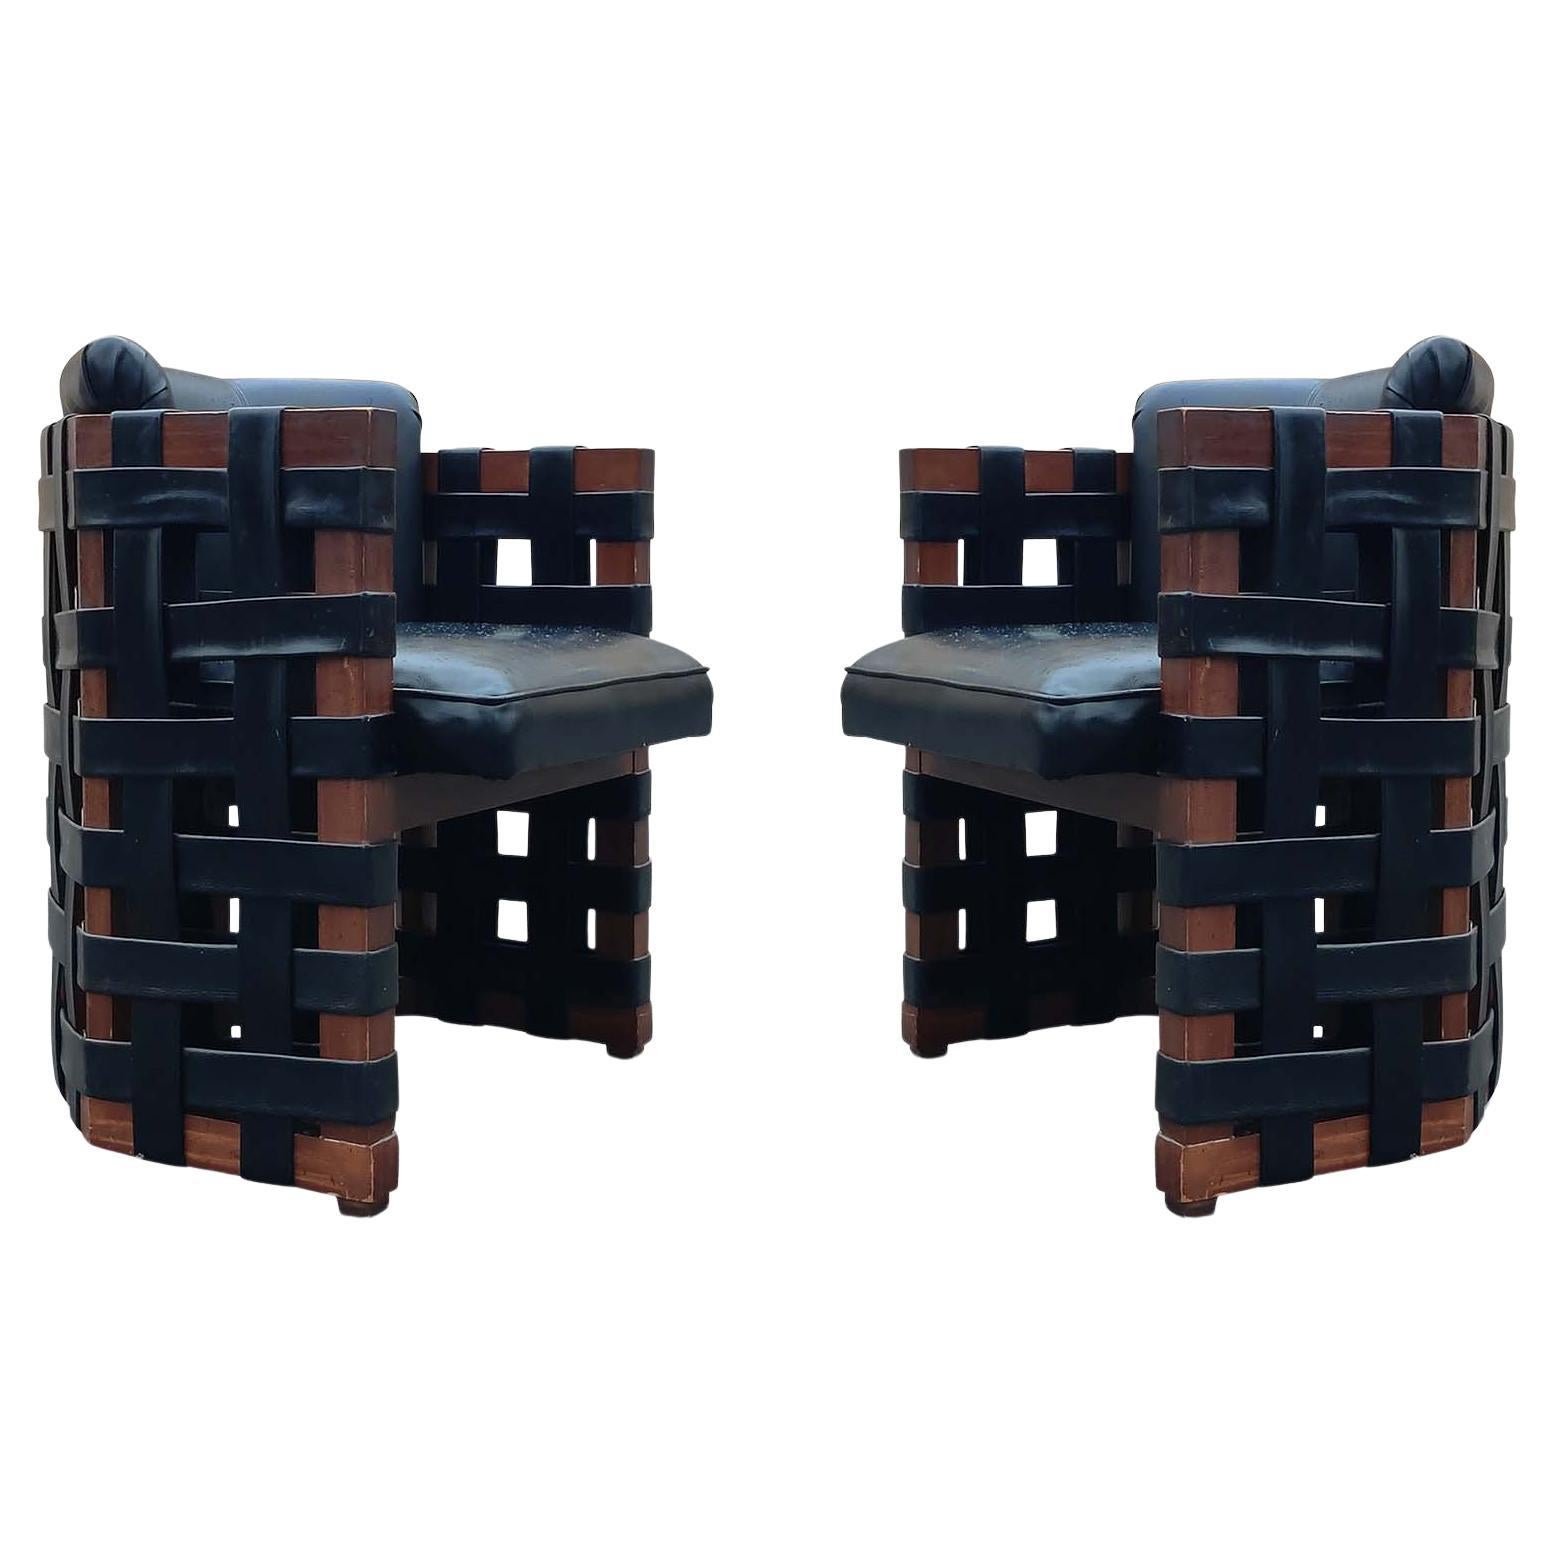 Pair of Brutalist Armchairs Woven Strap Leatherette Wood Frames, Circa 1960s For Sale